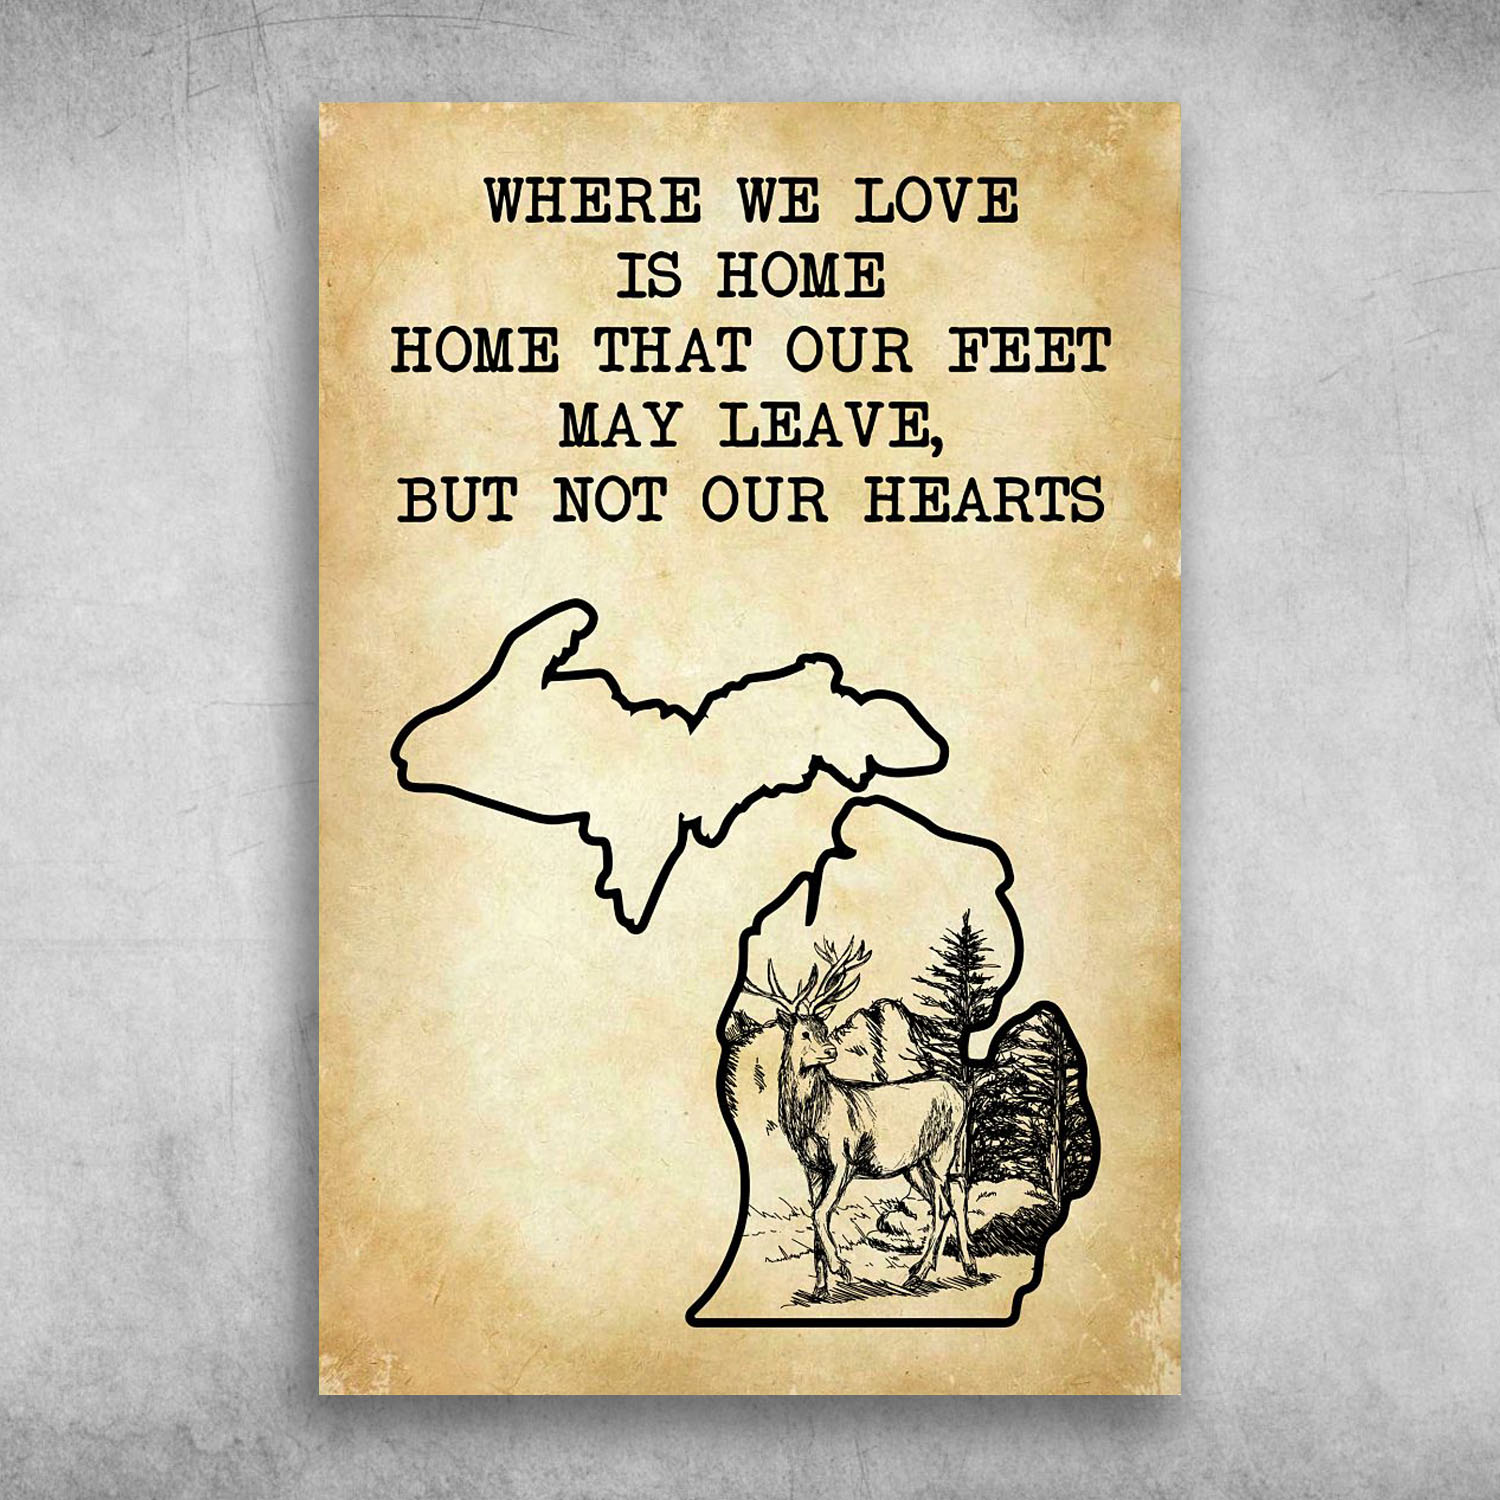 Home That Our Feet May Leave Michgan America